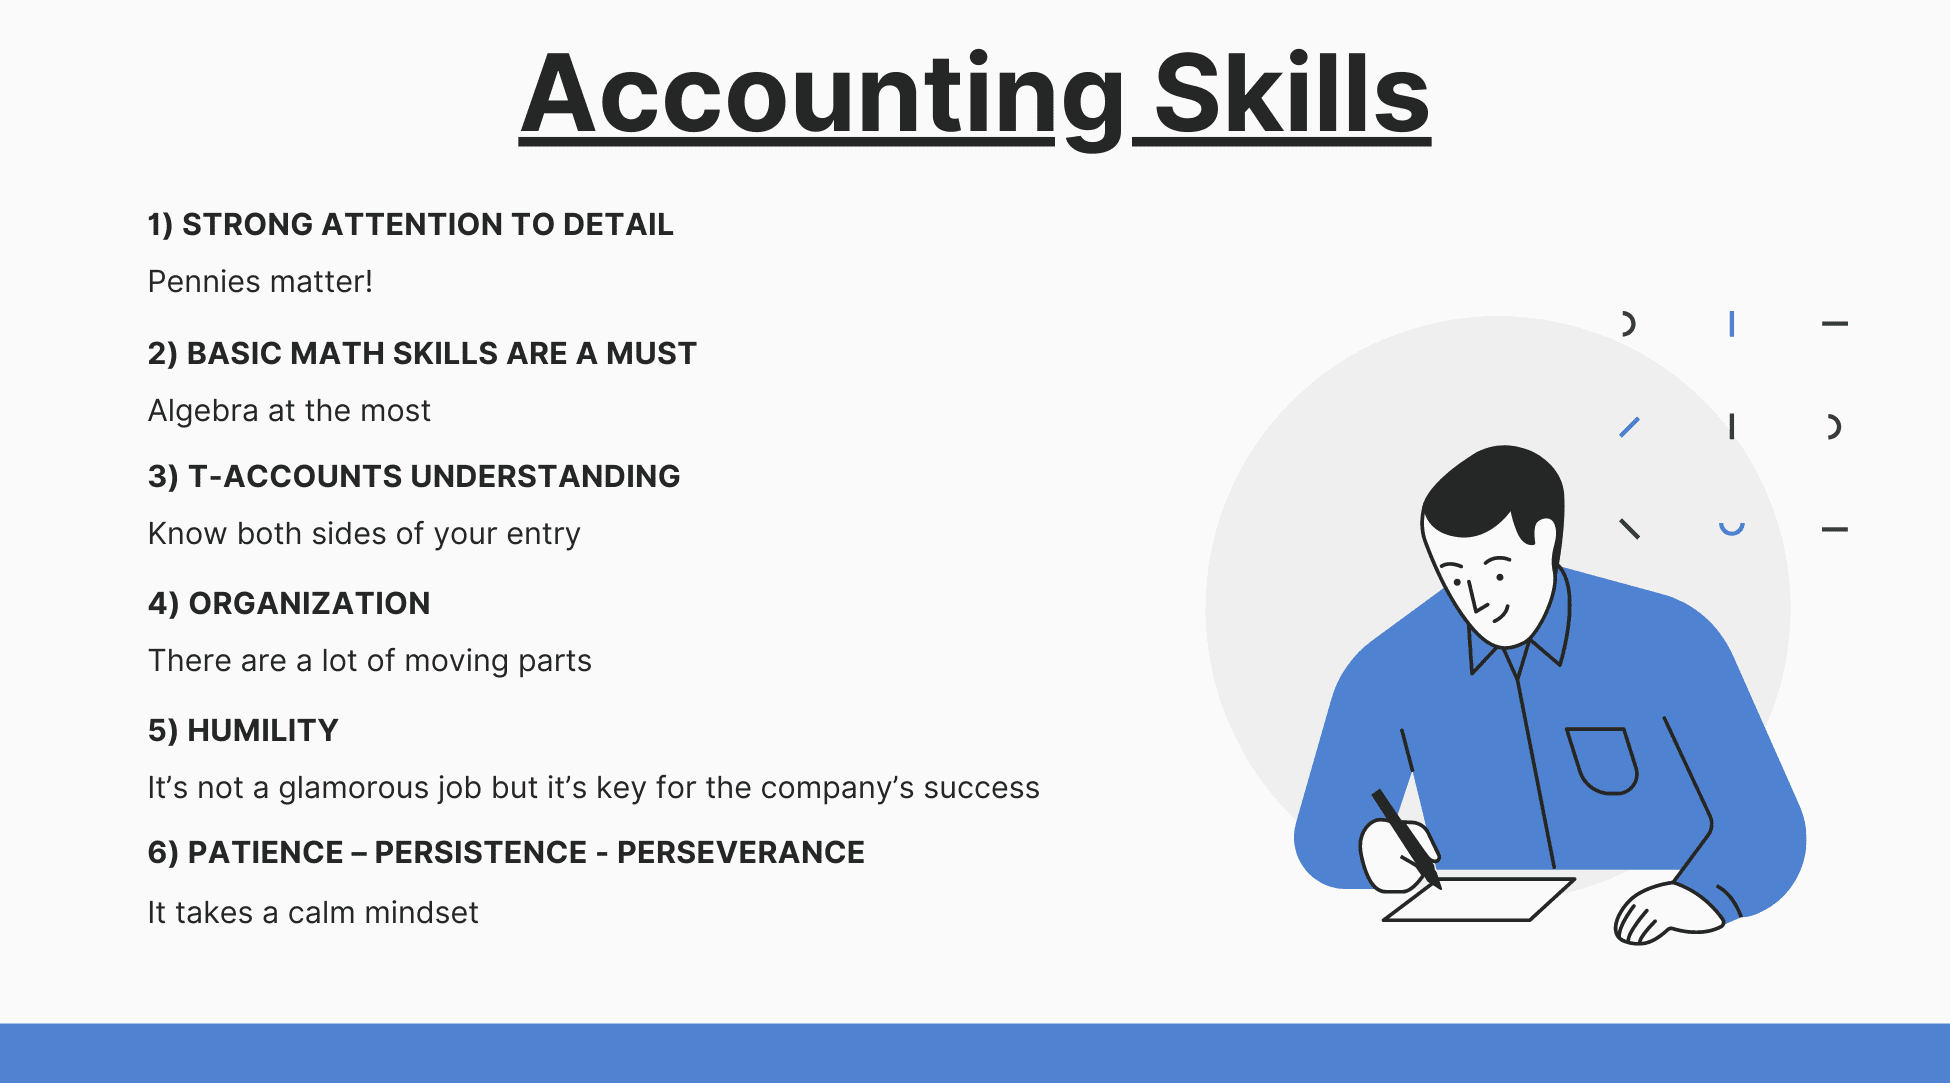 6 Skills That Will Help You Succeed in an Accounting Role (1)